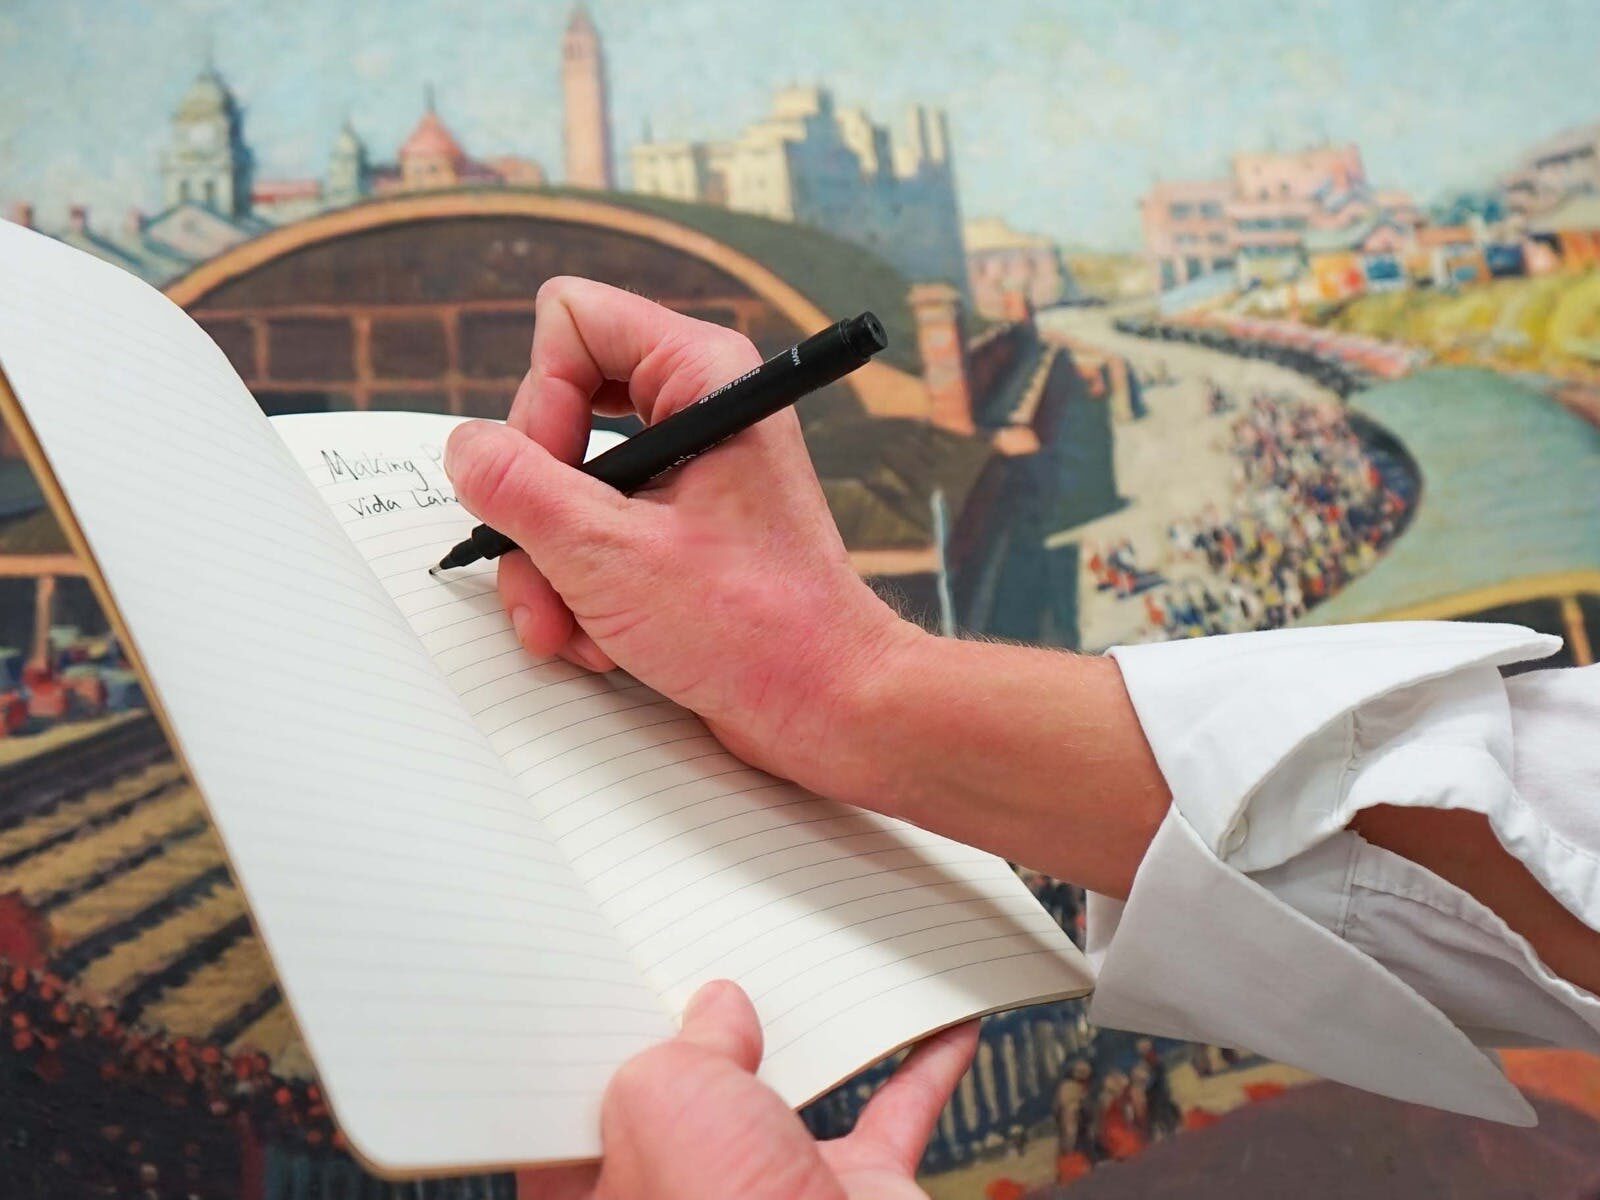 A hand holding a black pen writing in a notebook, a painting in the background.